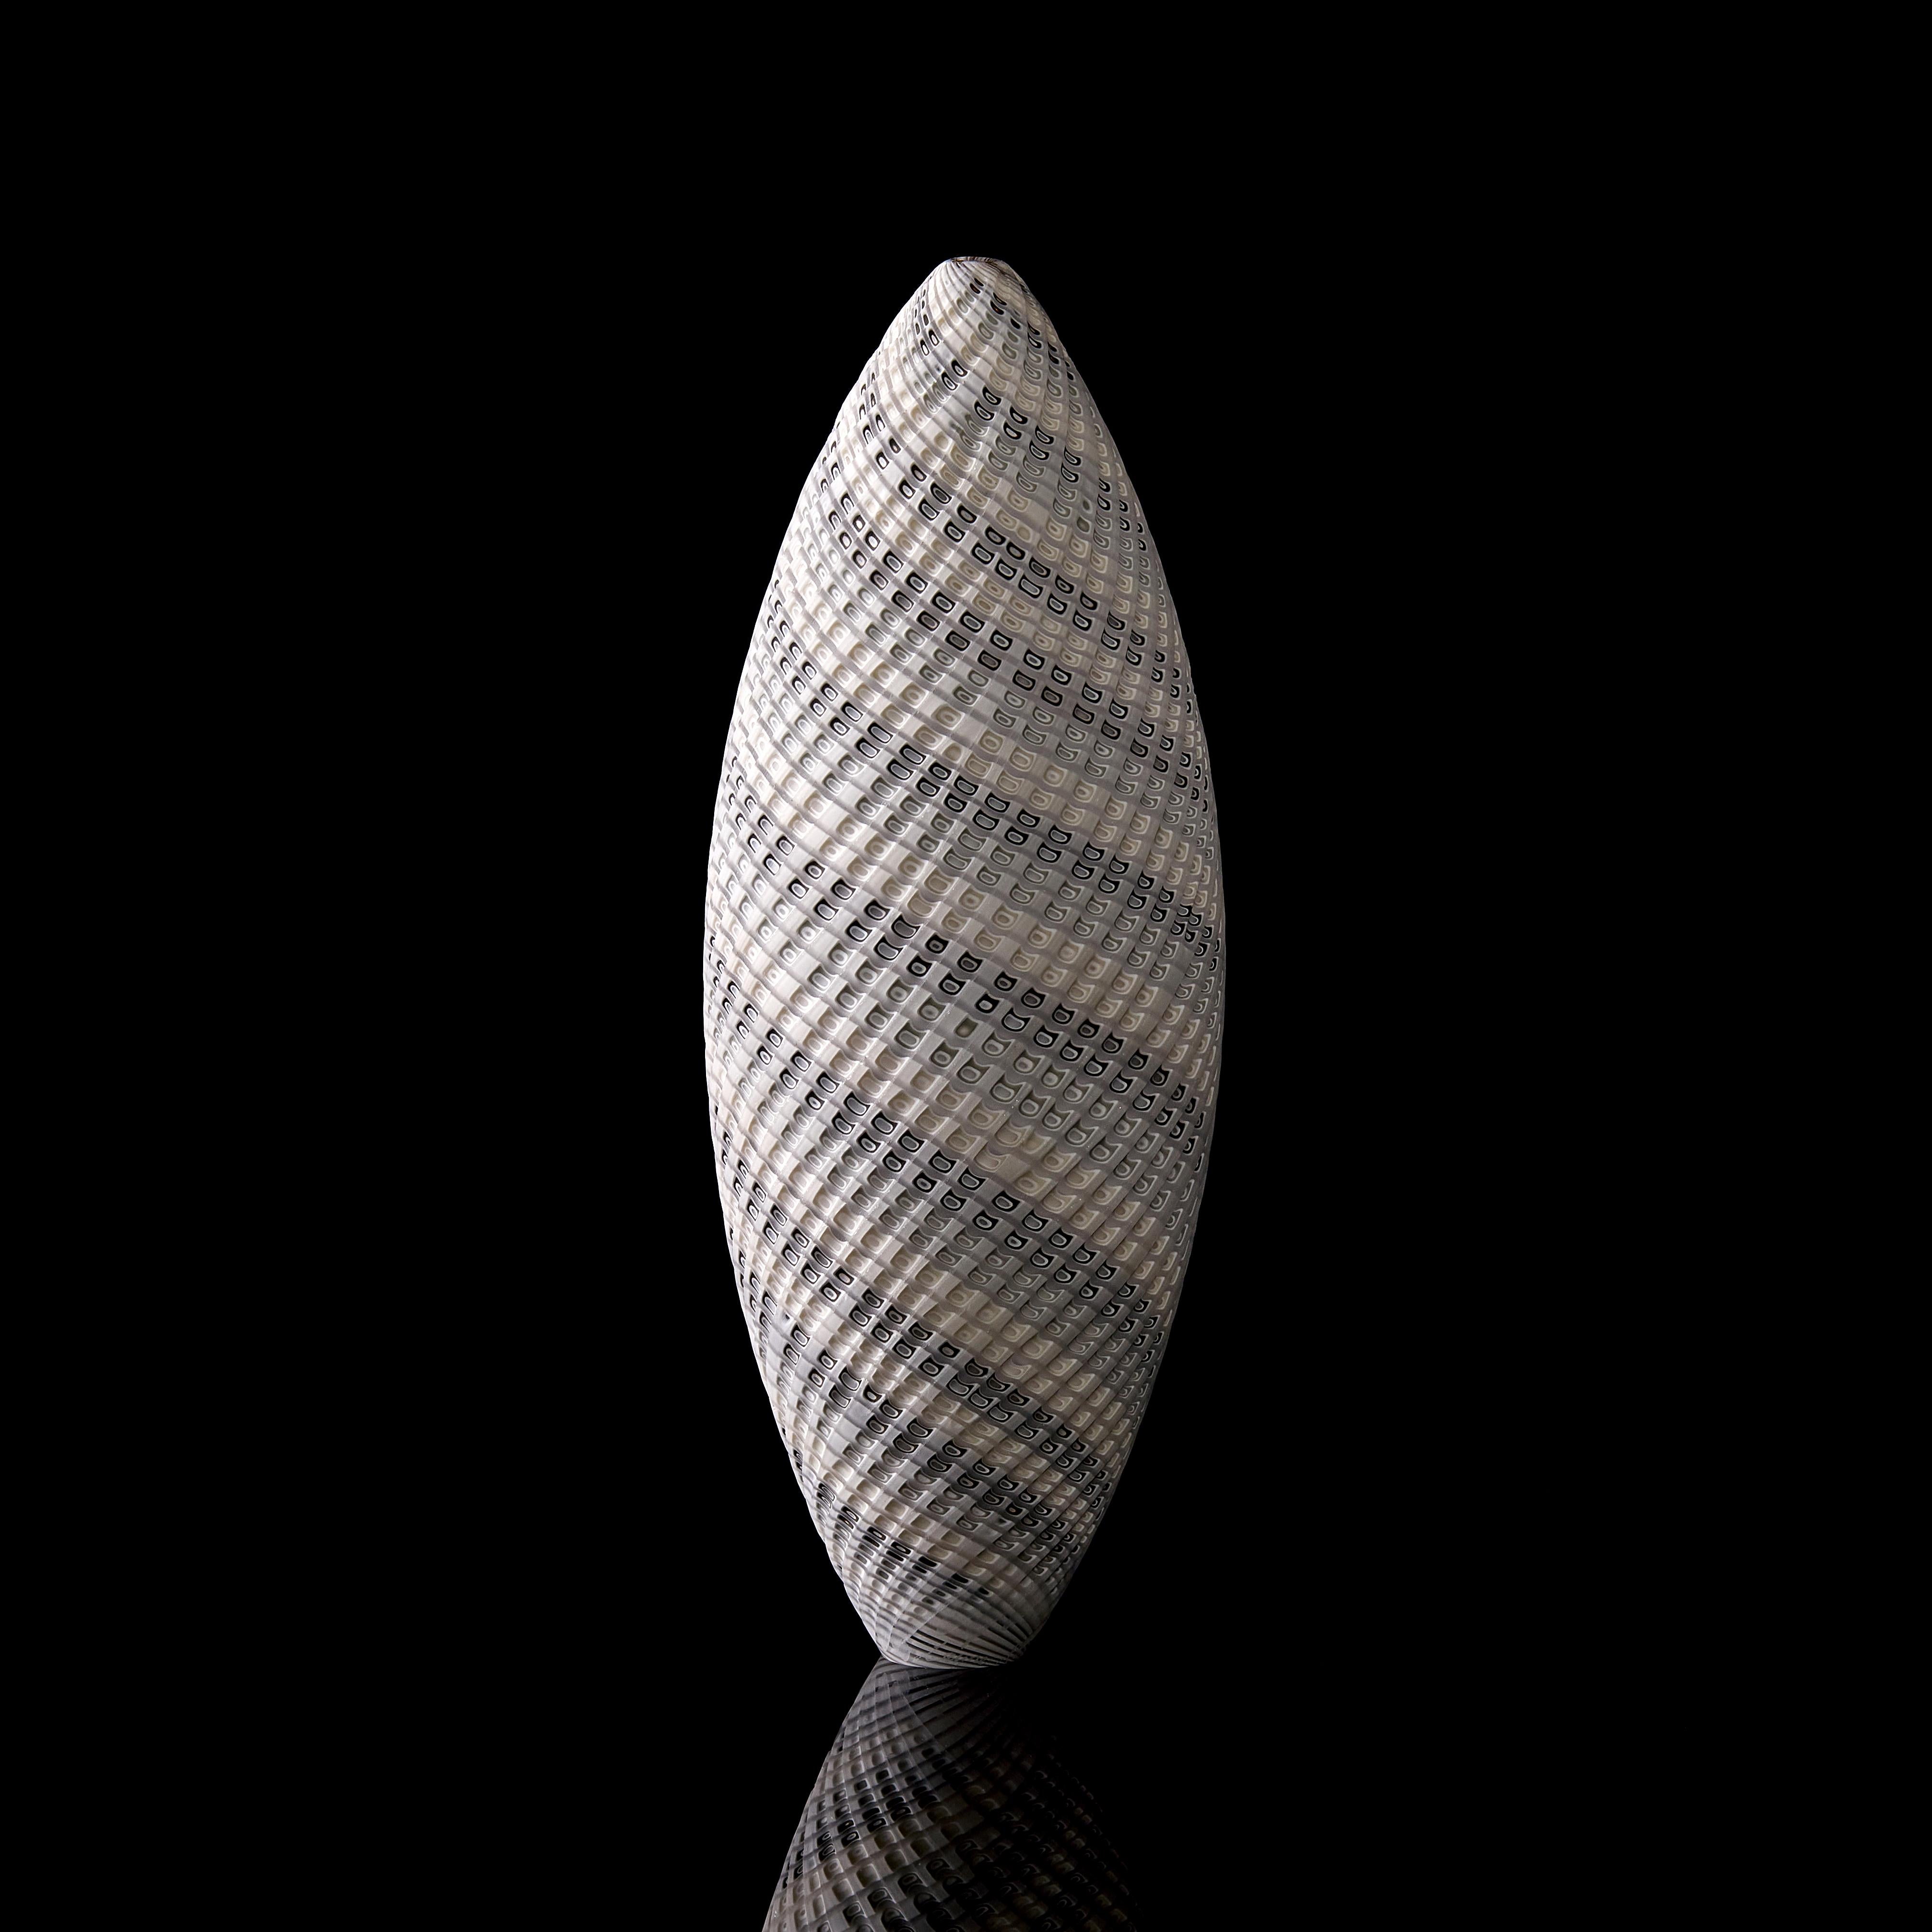 Hand-Crafted Woven Two-Tone White Pair, an Organic Textured Art Glass Duo by Layne Row